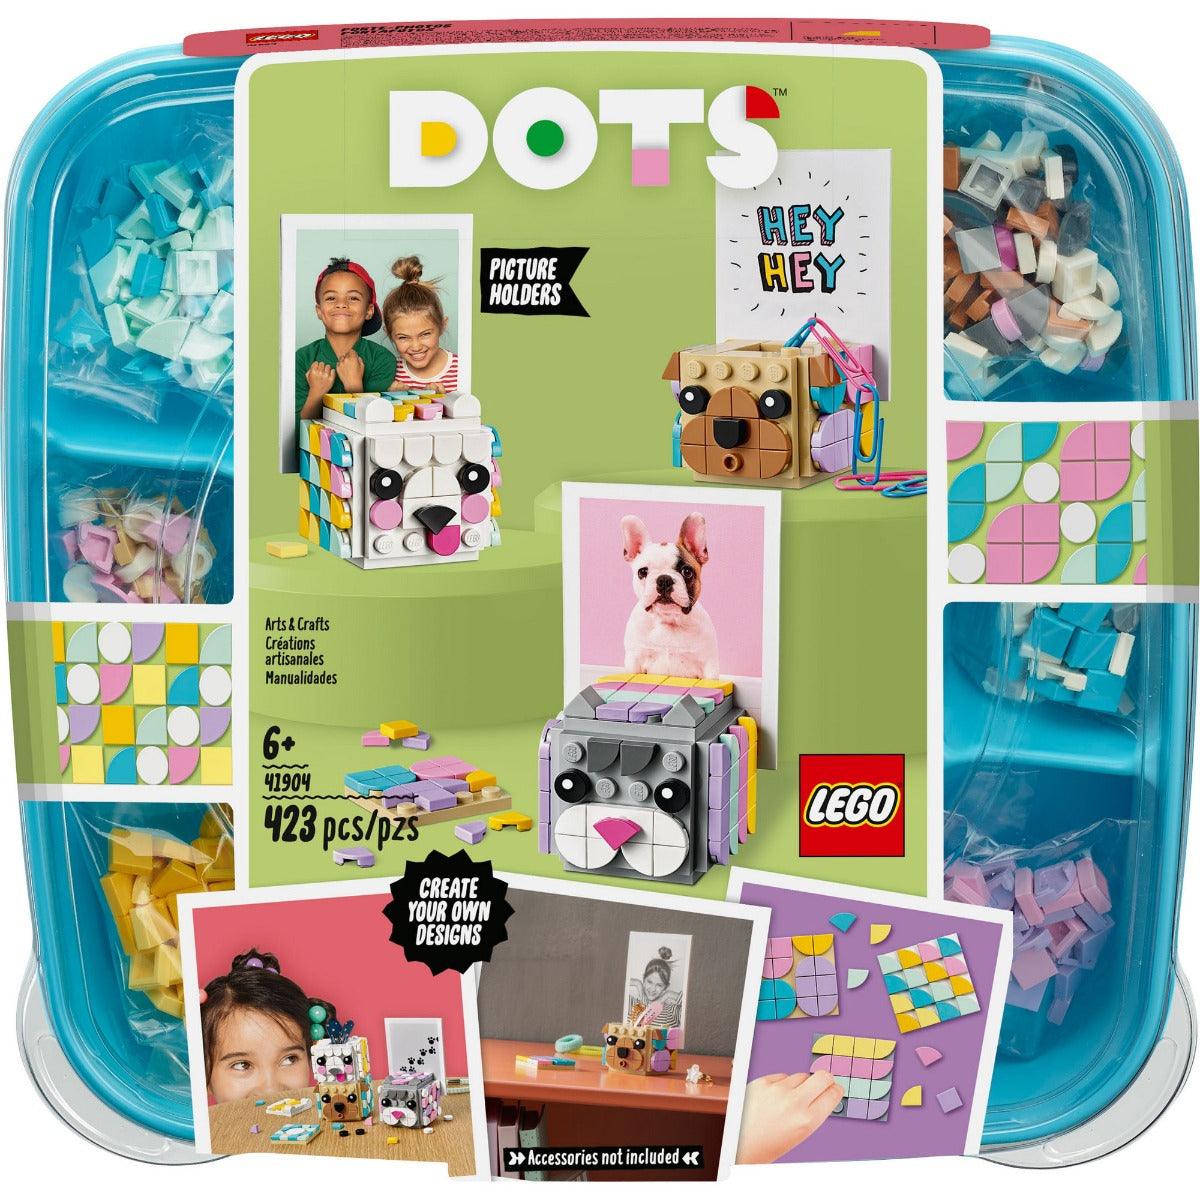 LEGO Dots Animal Picture Holders